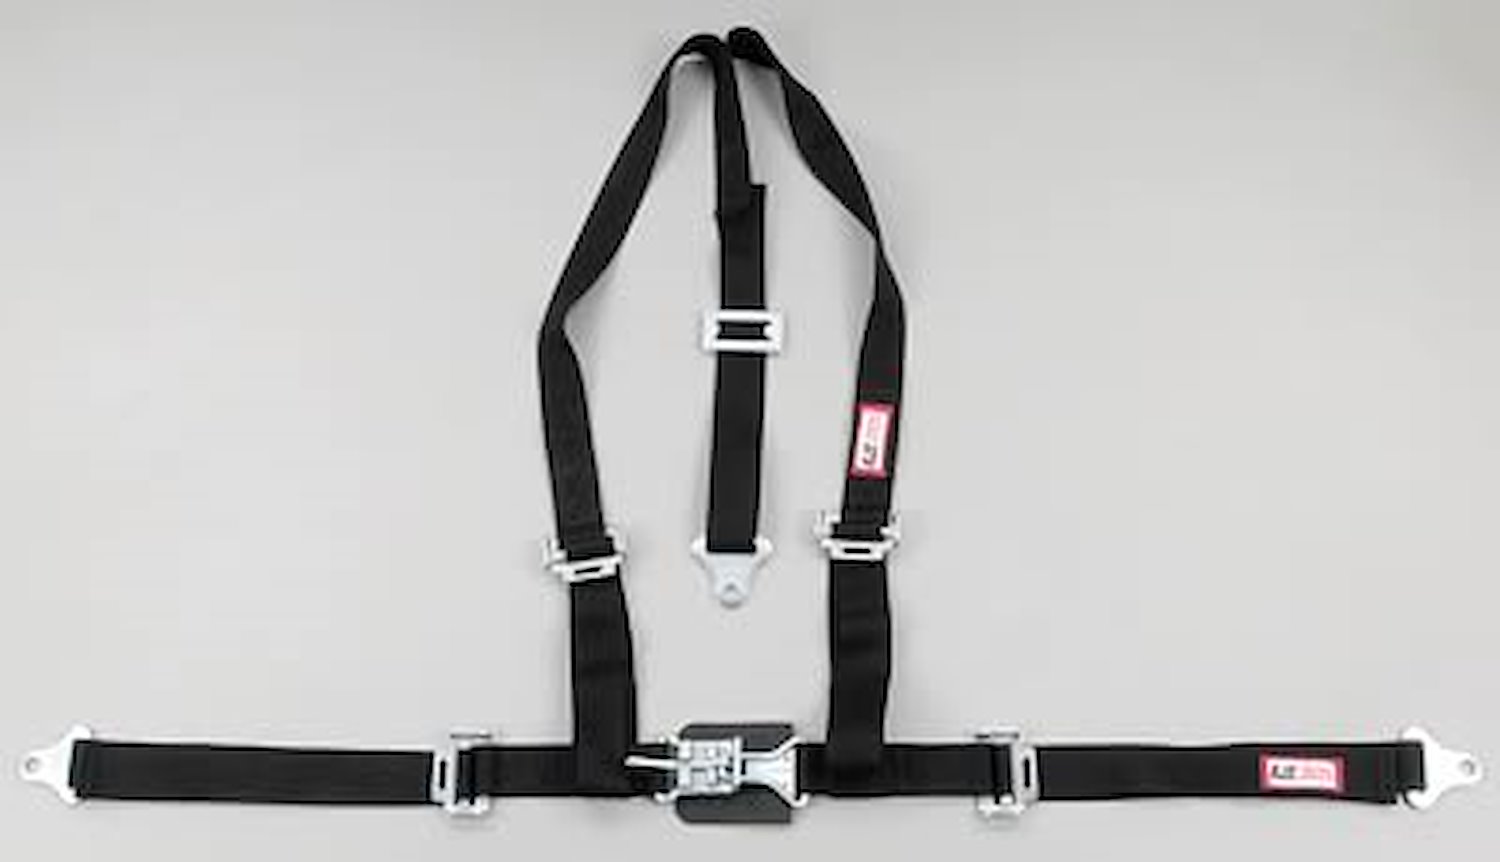 NON-SFI L&L HARNESS 2 PULL UP Lap Belt SEWN IN 2 S.H. Y FLOOR Mount ALL WRAP ENDS KHAKI